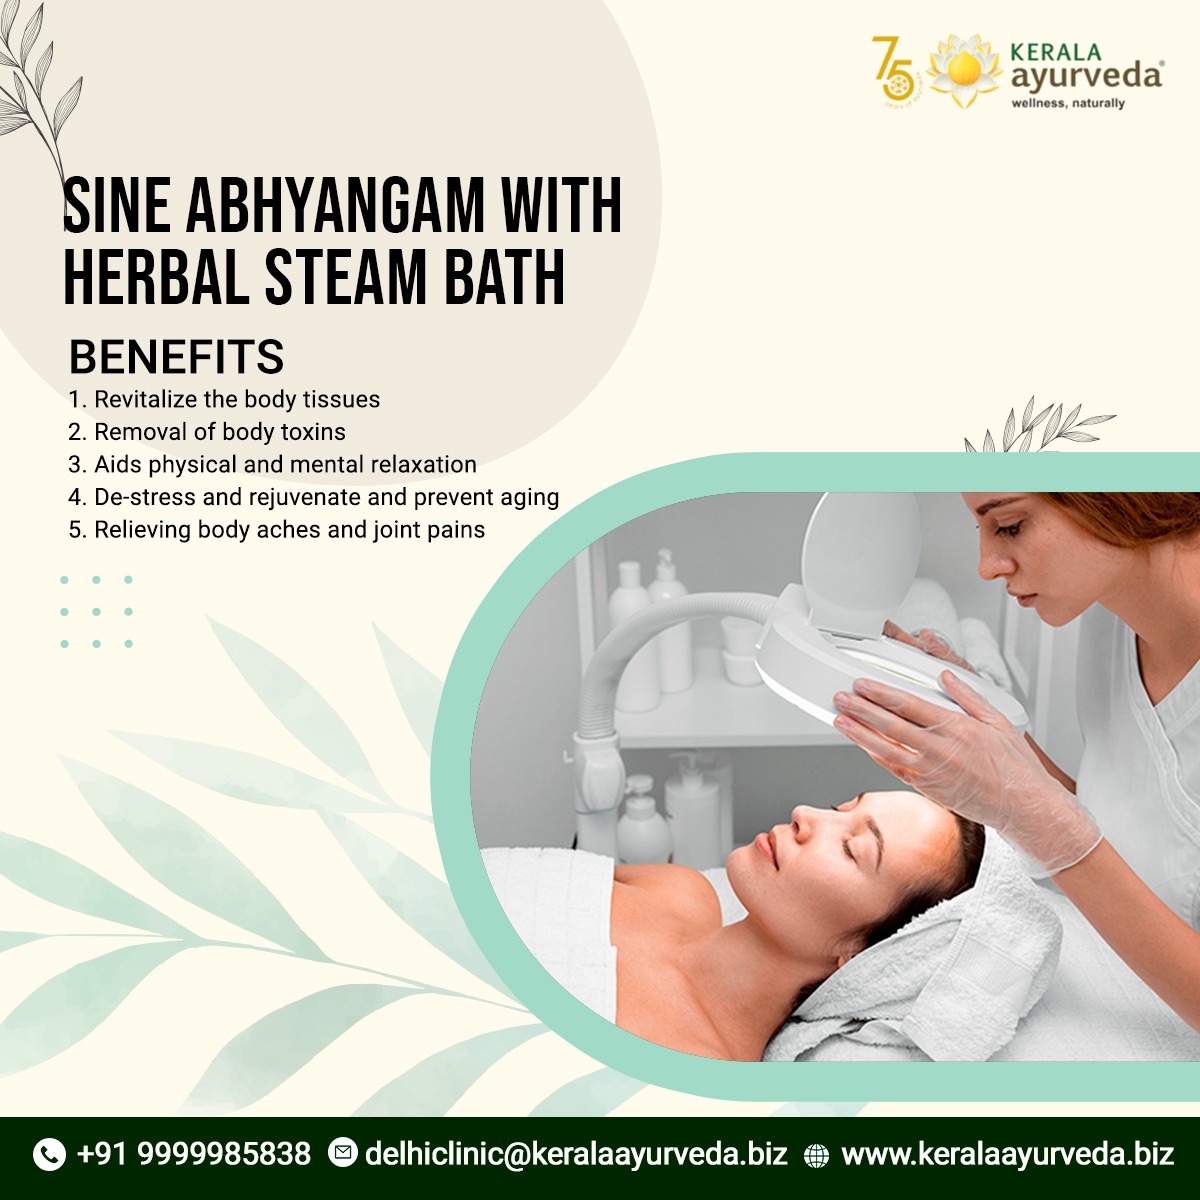 SINE ABHYANGAM WITH HERBAL STEAM BATH
BENEFITS
🔰Revitalize the body tissues
🔰Removal of body toxins
🔰Aids physical and mental relaxation
📞+91 9999985838
👉keralaayurveda.biz
📨 Delhiclinic@keralaayurveda.biz
#ayurveda #ayurvedatreatment #ayurvedalifestyle #ayurveda